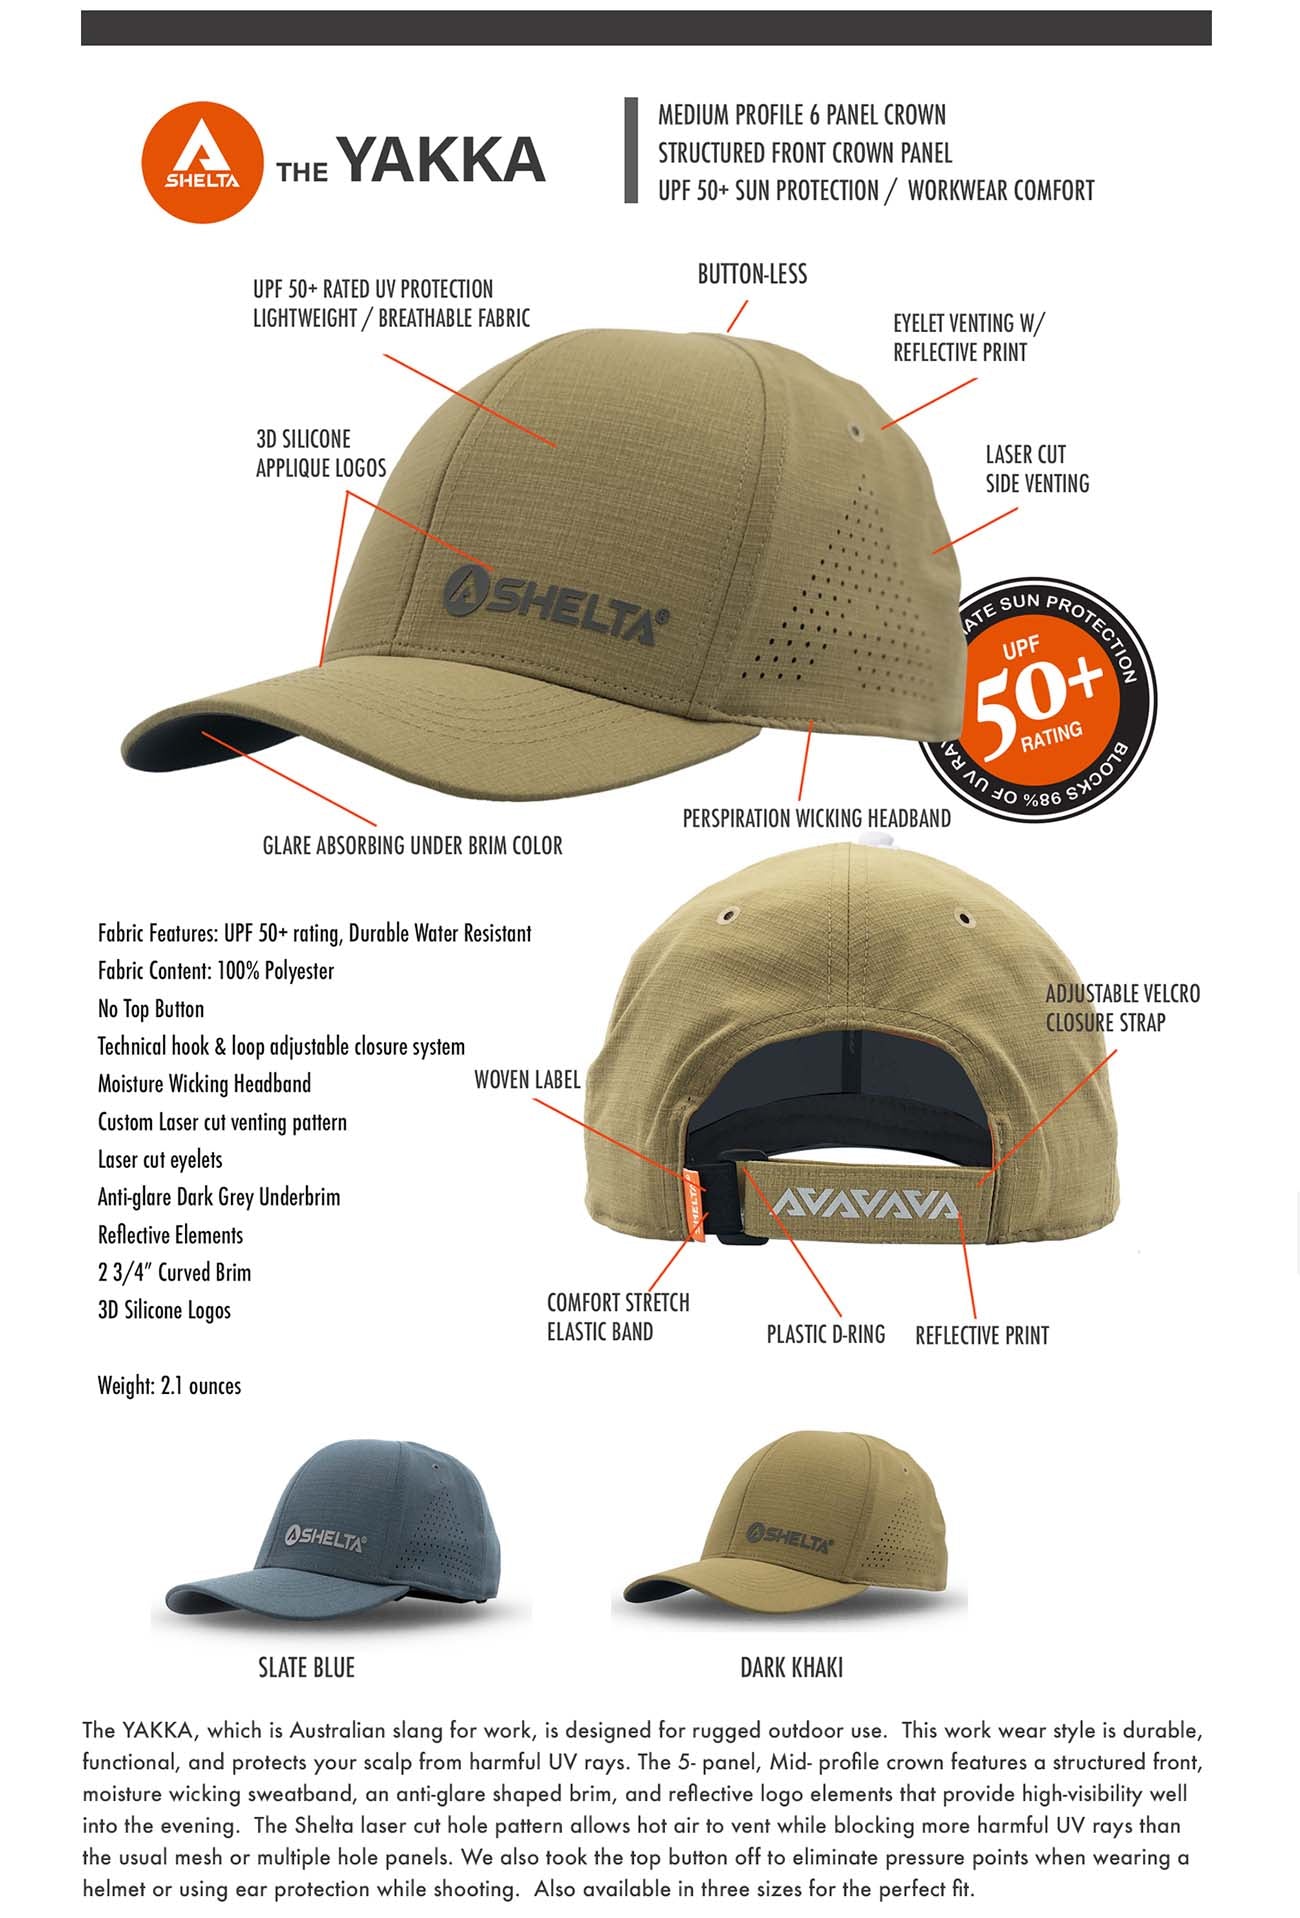 The YAKKA, which is Australian slang for work, is designed for rugged outdoor use.  This work wear style is durable, functional, and protects your scalp from harmful UV rays. The 5- panel, Mid- profile crown features a structured front, moisture wicking sweatband, an anti-glare shaped brim, and reflective logo elements that provide high-visibility well into the evening.  The Shelta laser cut hole pattern allows hot air to vent while blocking more harmful UV rays than the usual mesh or multiple hole panels. We also took the top button off to eliminate pressure points when wearing a helmet or using ear protection while shooting.  Also available in three sizes for the perfect fit